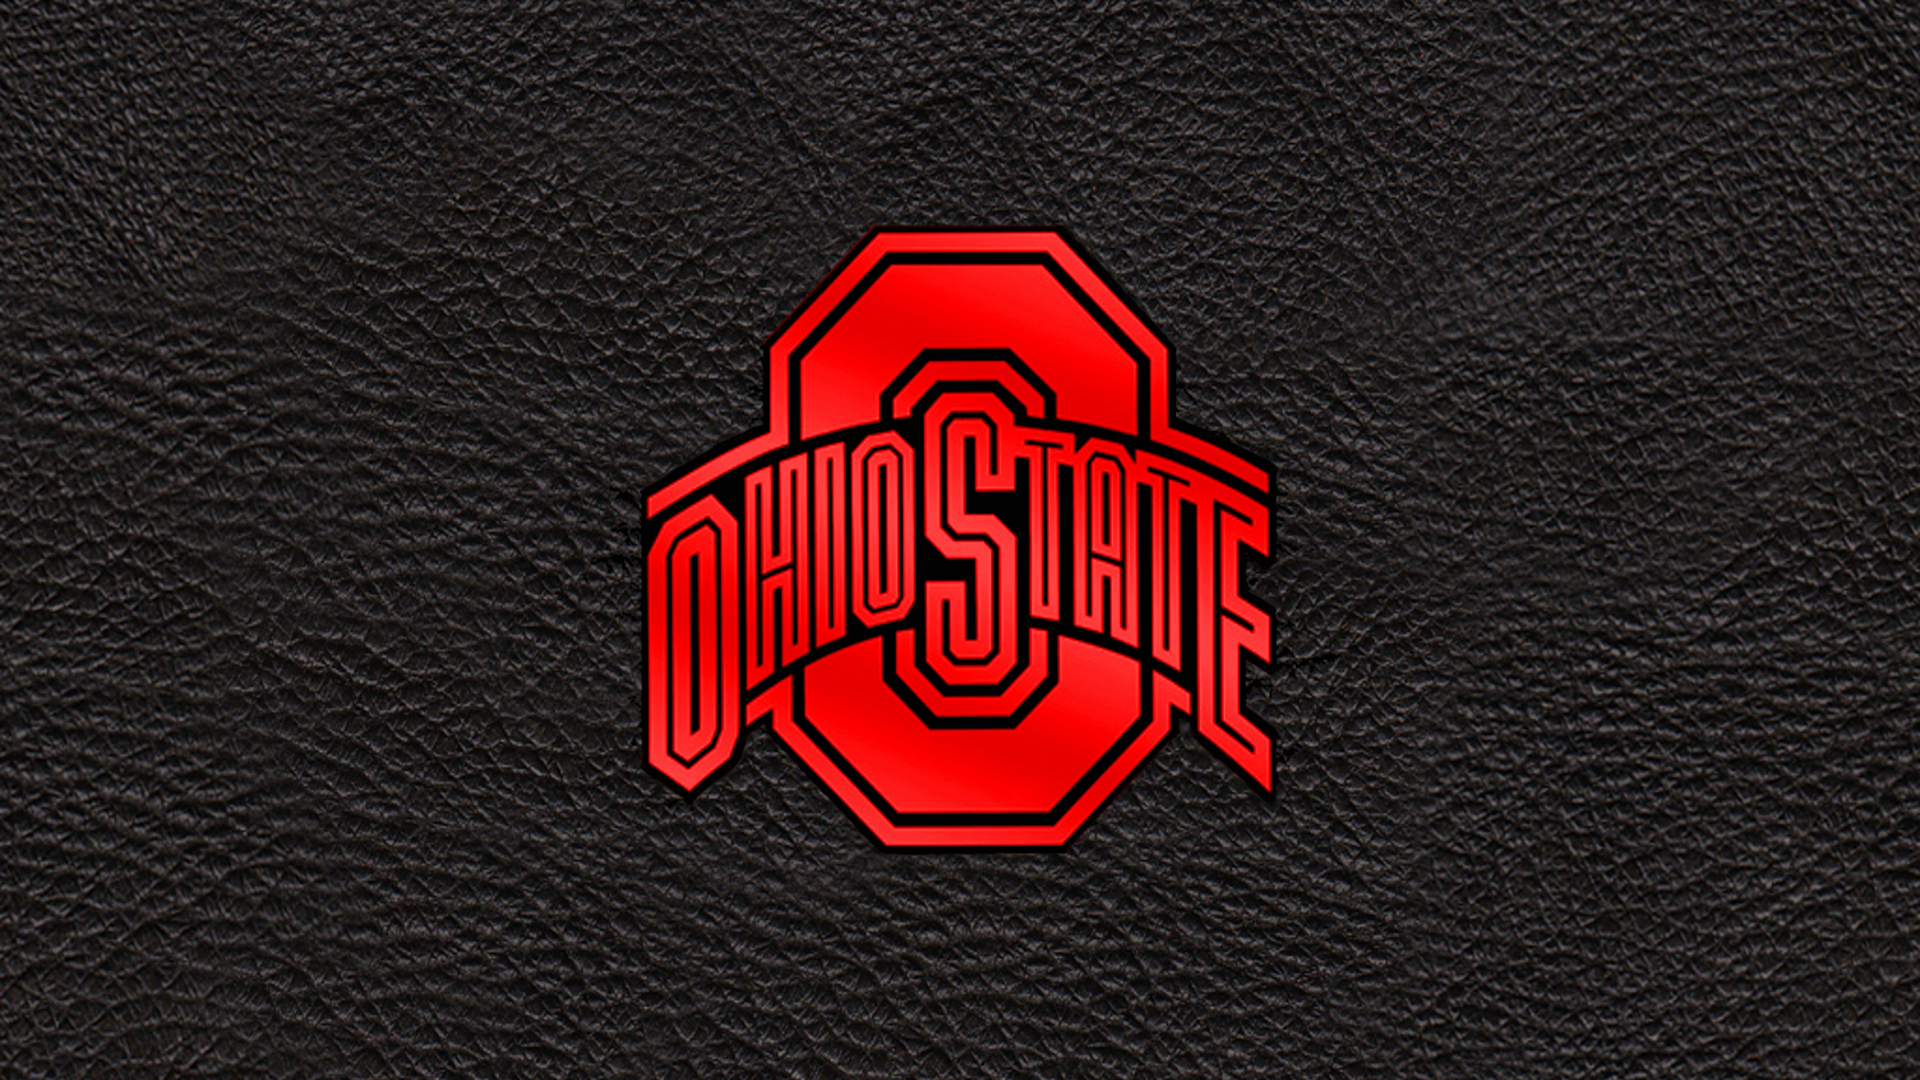 Ohio State Wallpaper And Screensaver Clubs